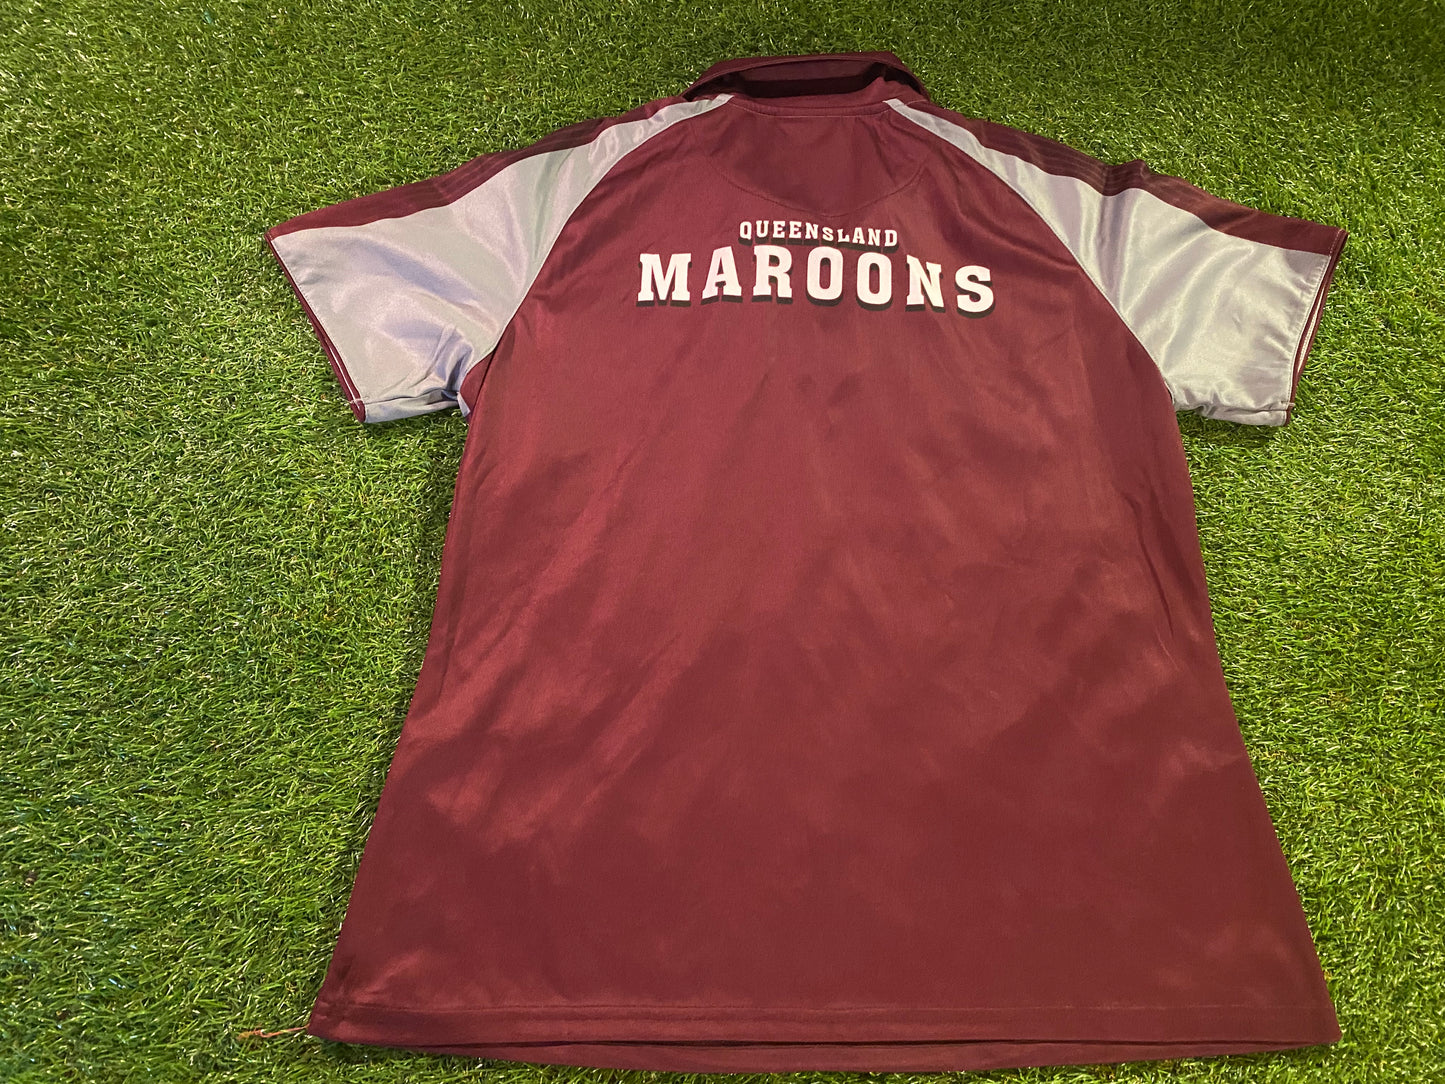 Queensland Maroons Australia Rugby League Womans Size 14 Jersey